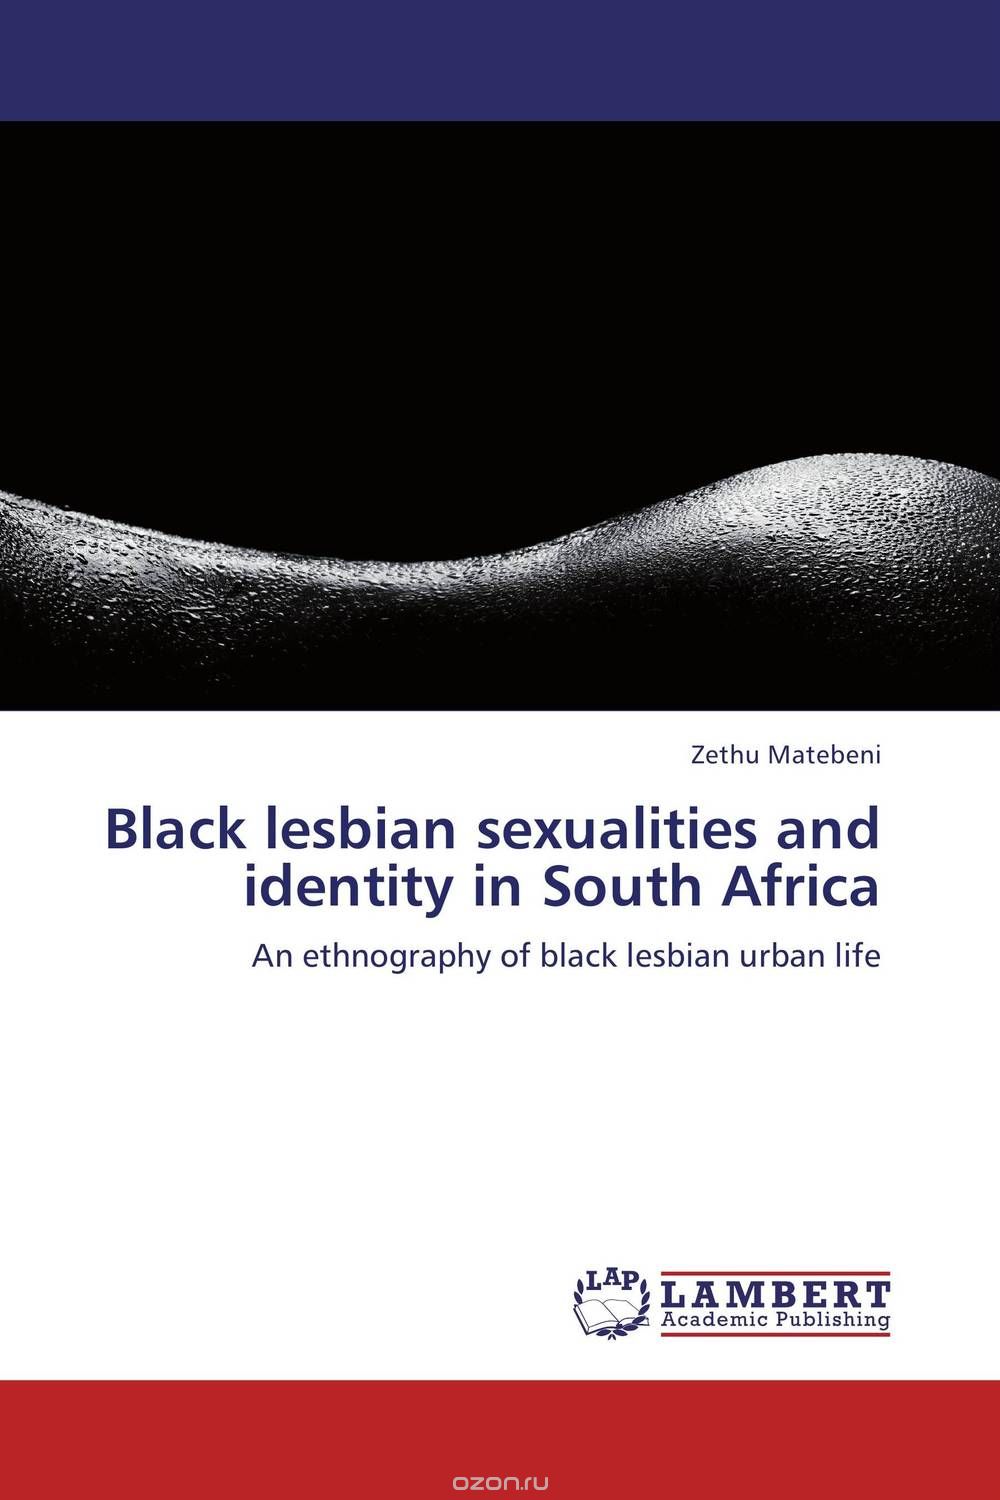 Скачать книгу "Black lesbian sexualities and identity in South Africa"